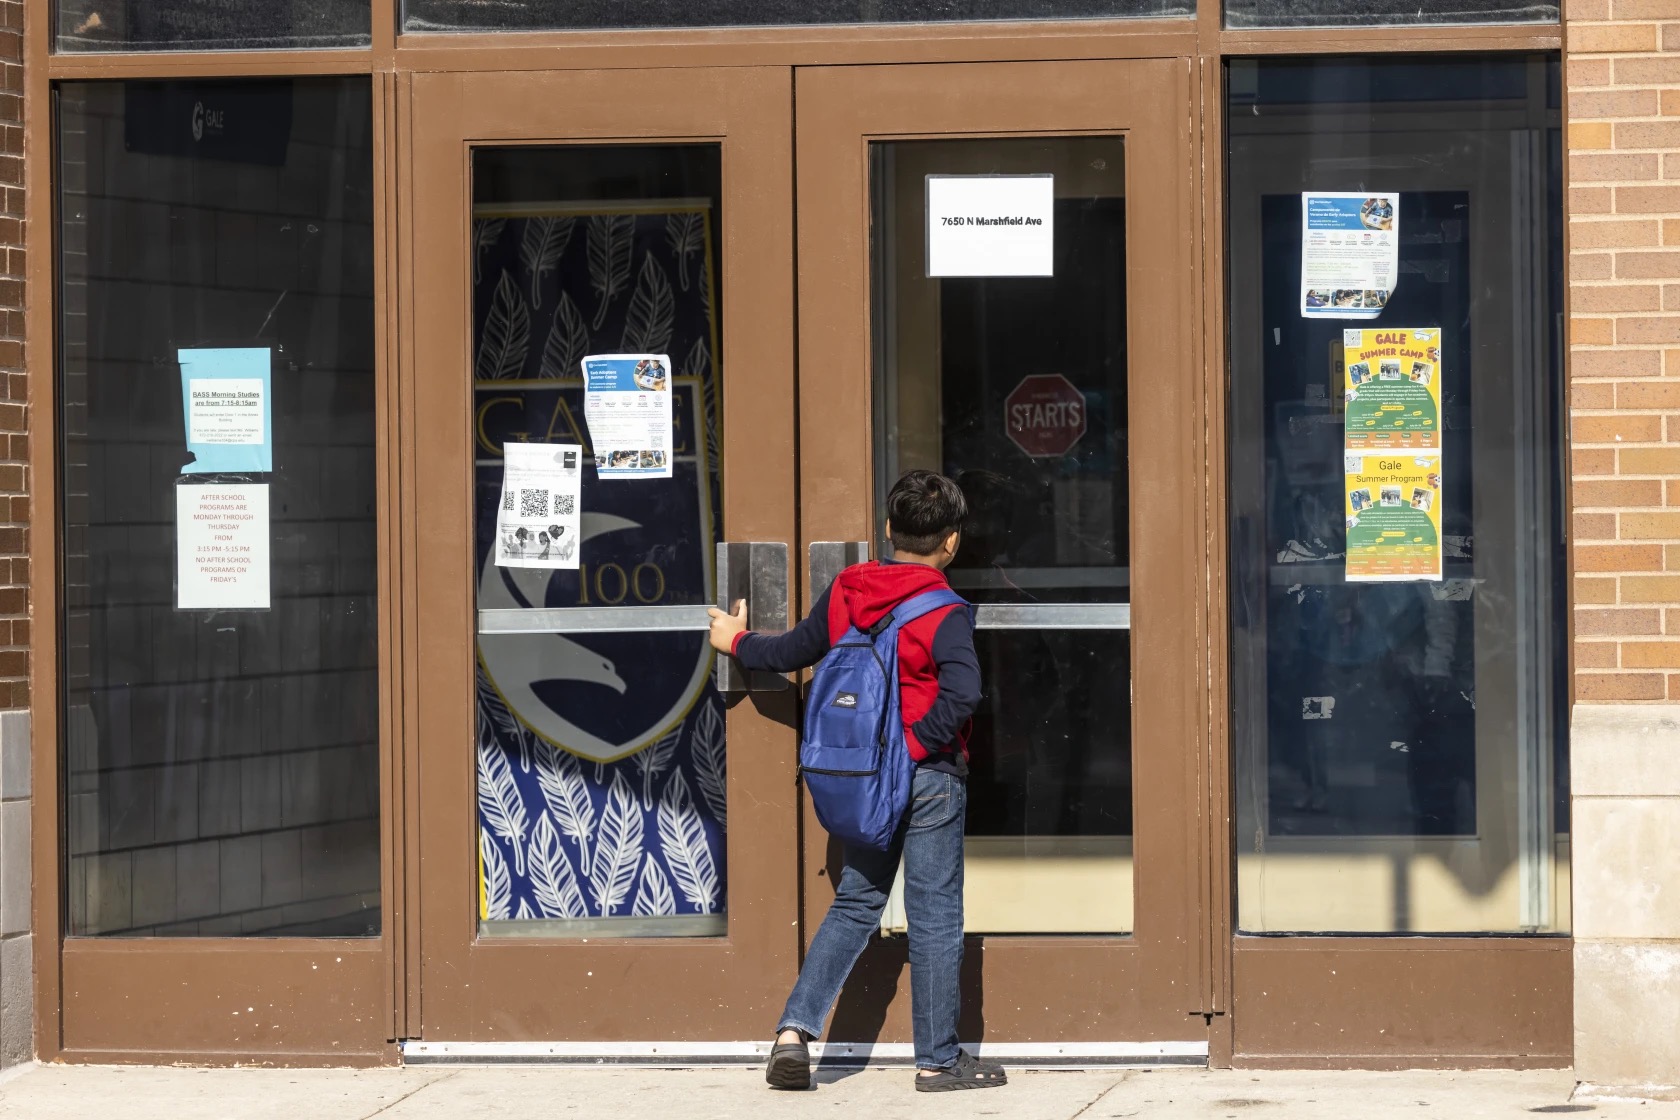 A student arrives for school at the Stephen F. Gale School Annex